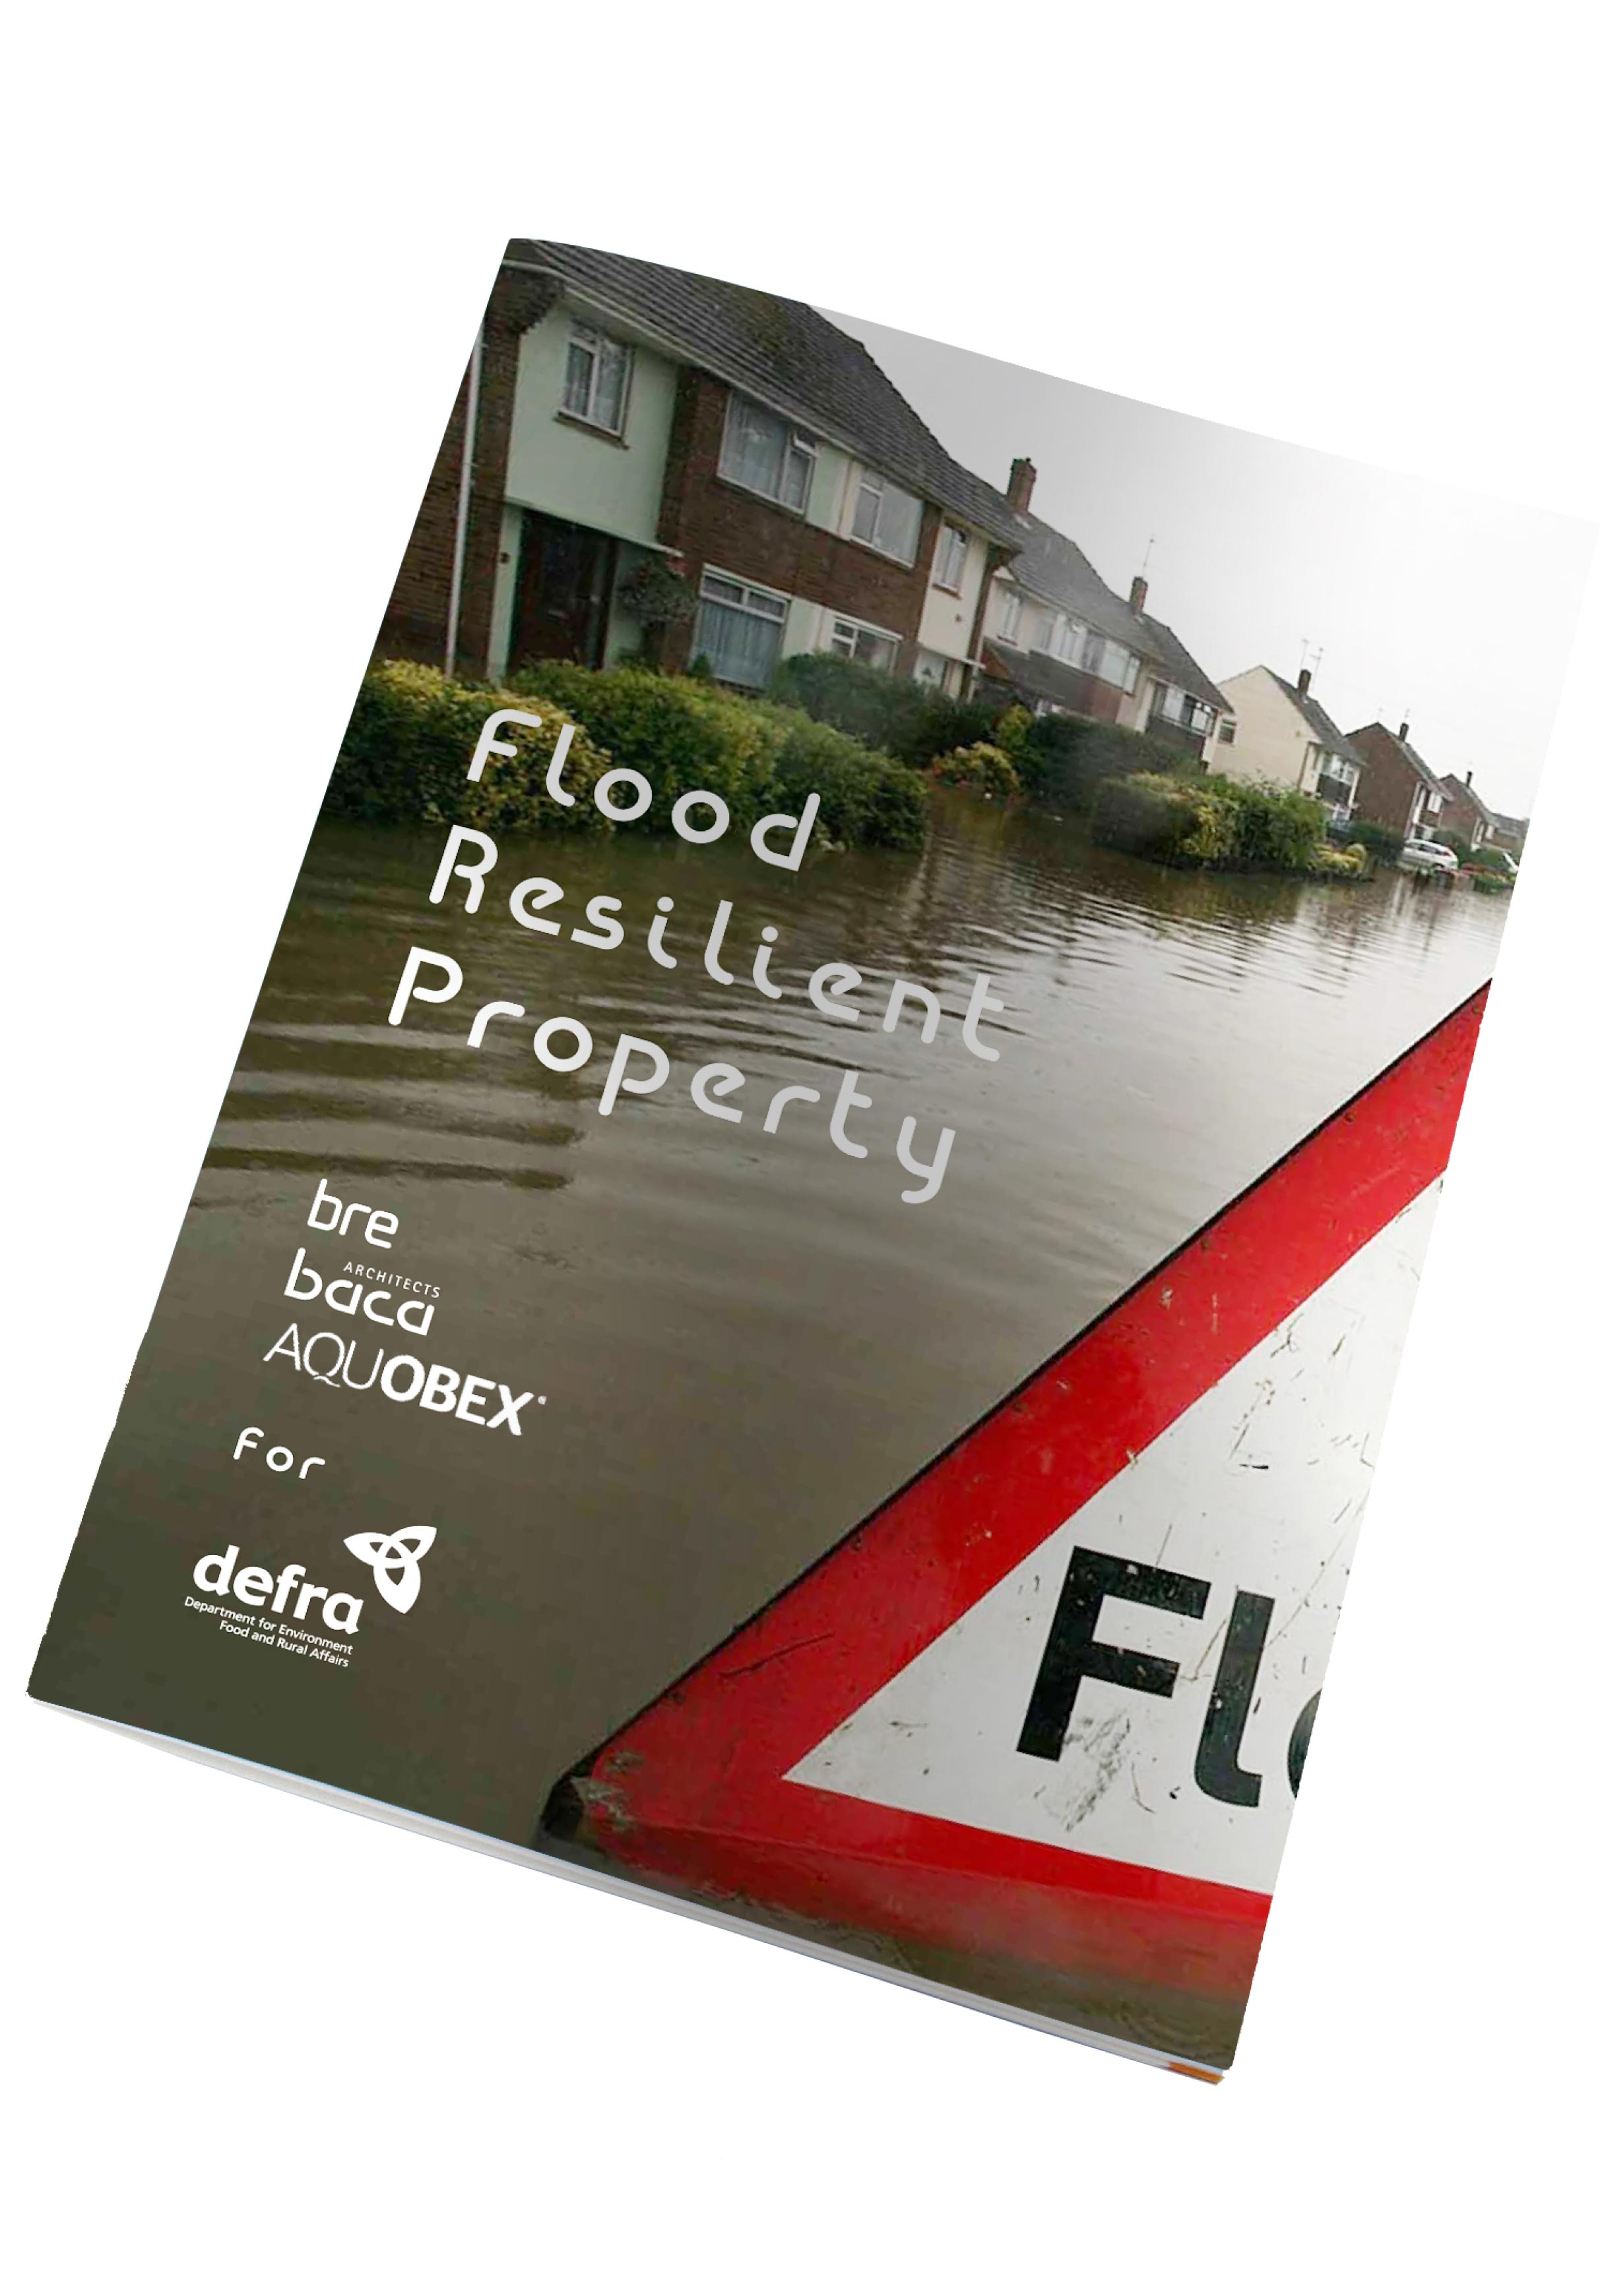 Booklet for BRE Flood Resilient Property